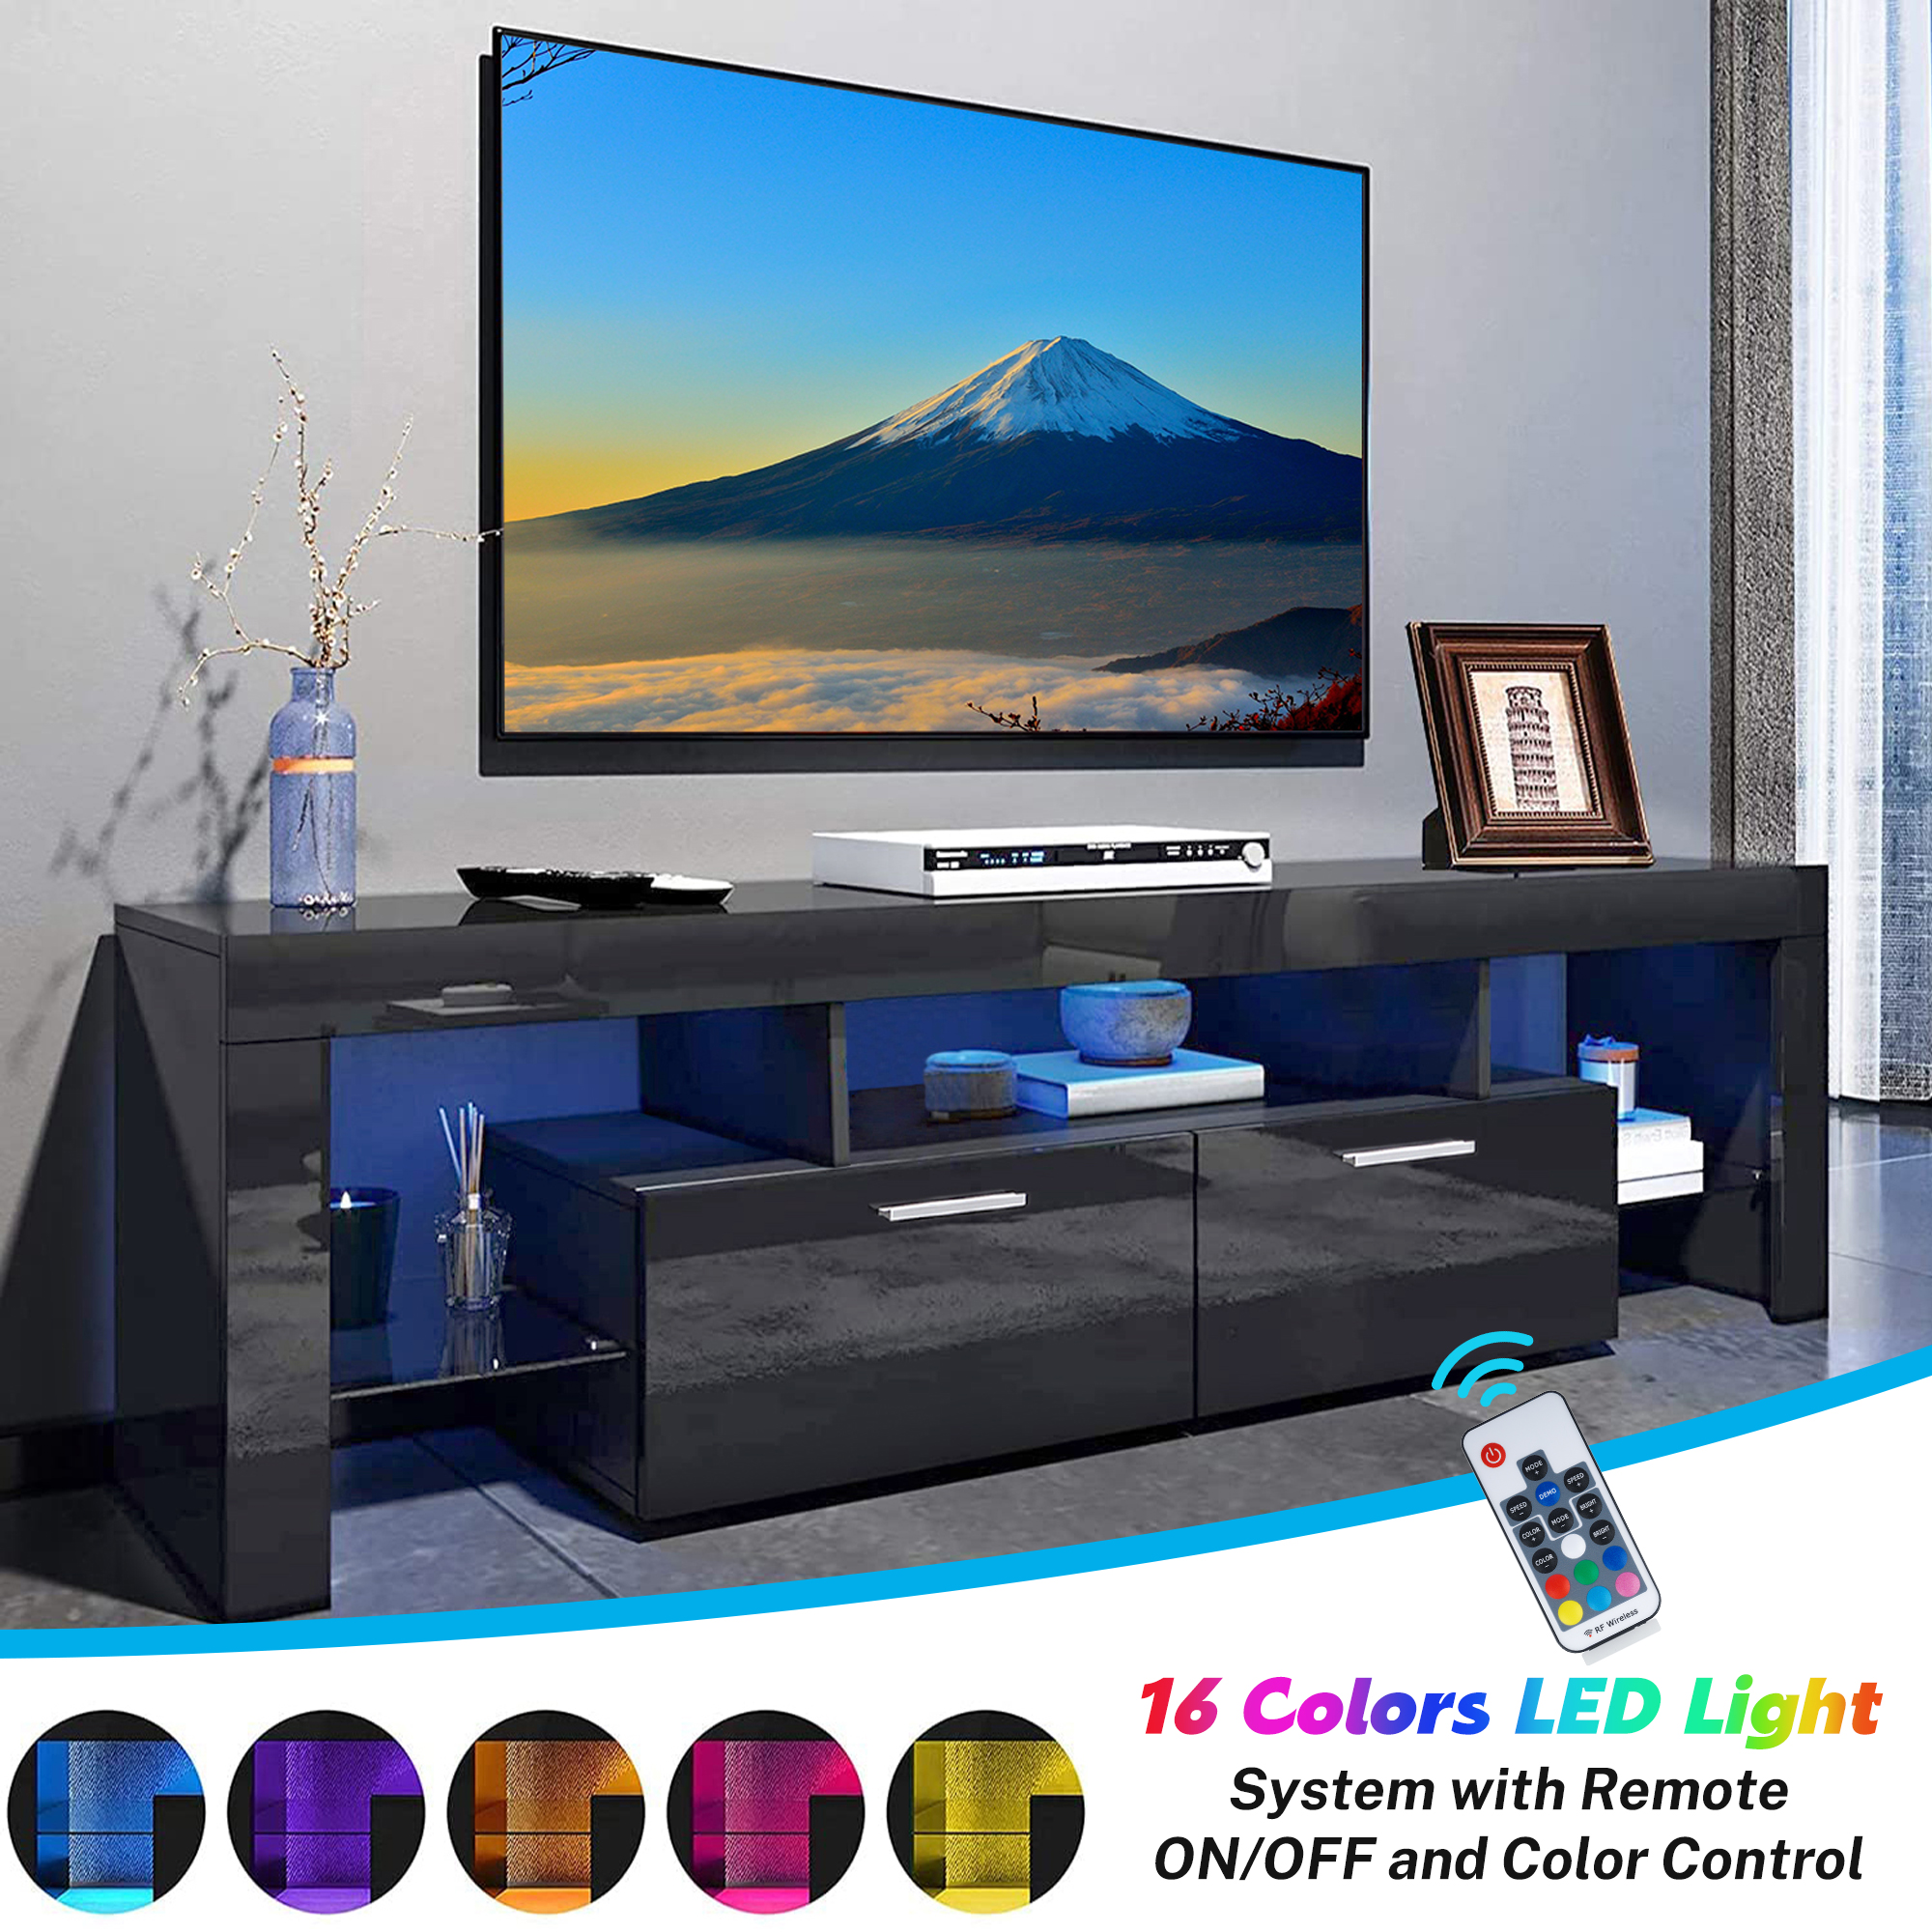 Black TV Stand for 70 inch TV, Modern High Glossy Television Table Stands TV Cabinet Console Table with 16 Colors LED Lights, TV Buffet Cabinet with Storage, Living Room Entertainment Center - image 4 of 13